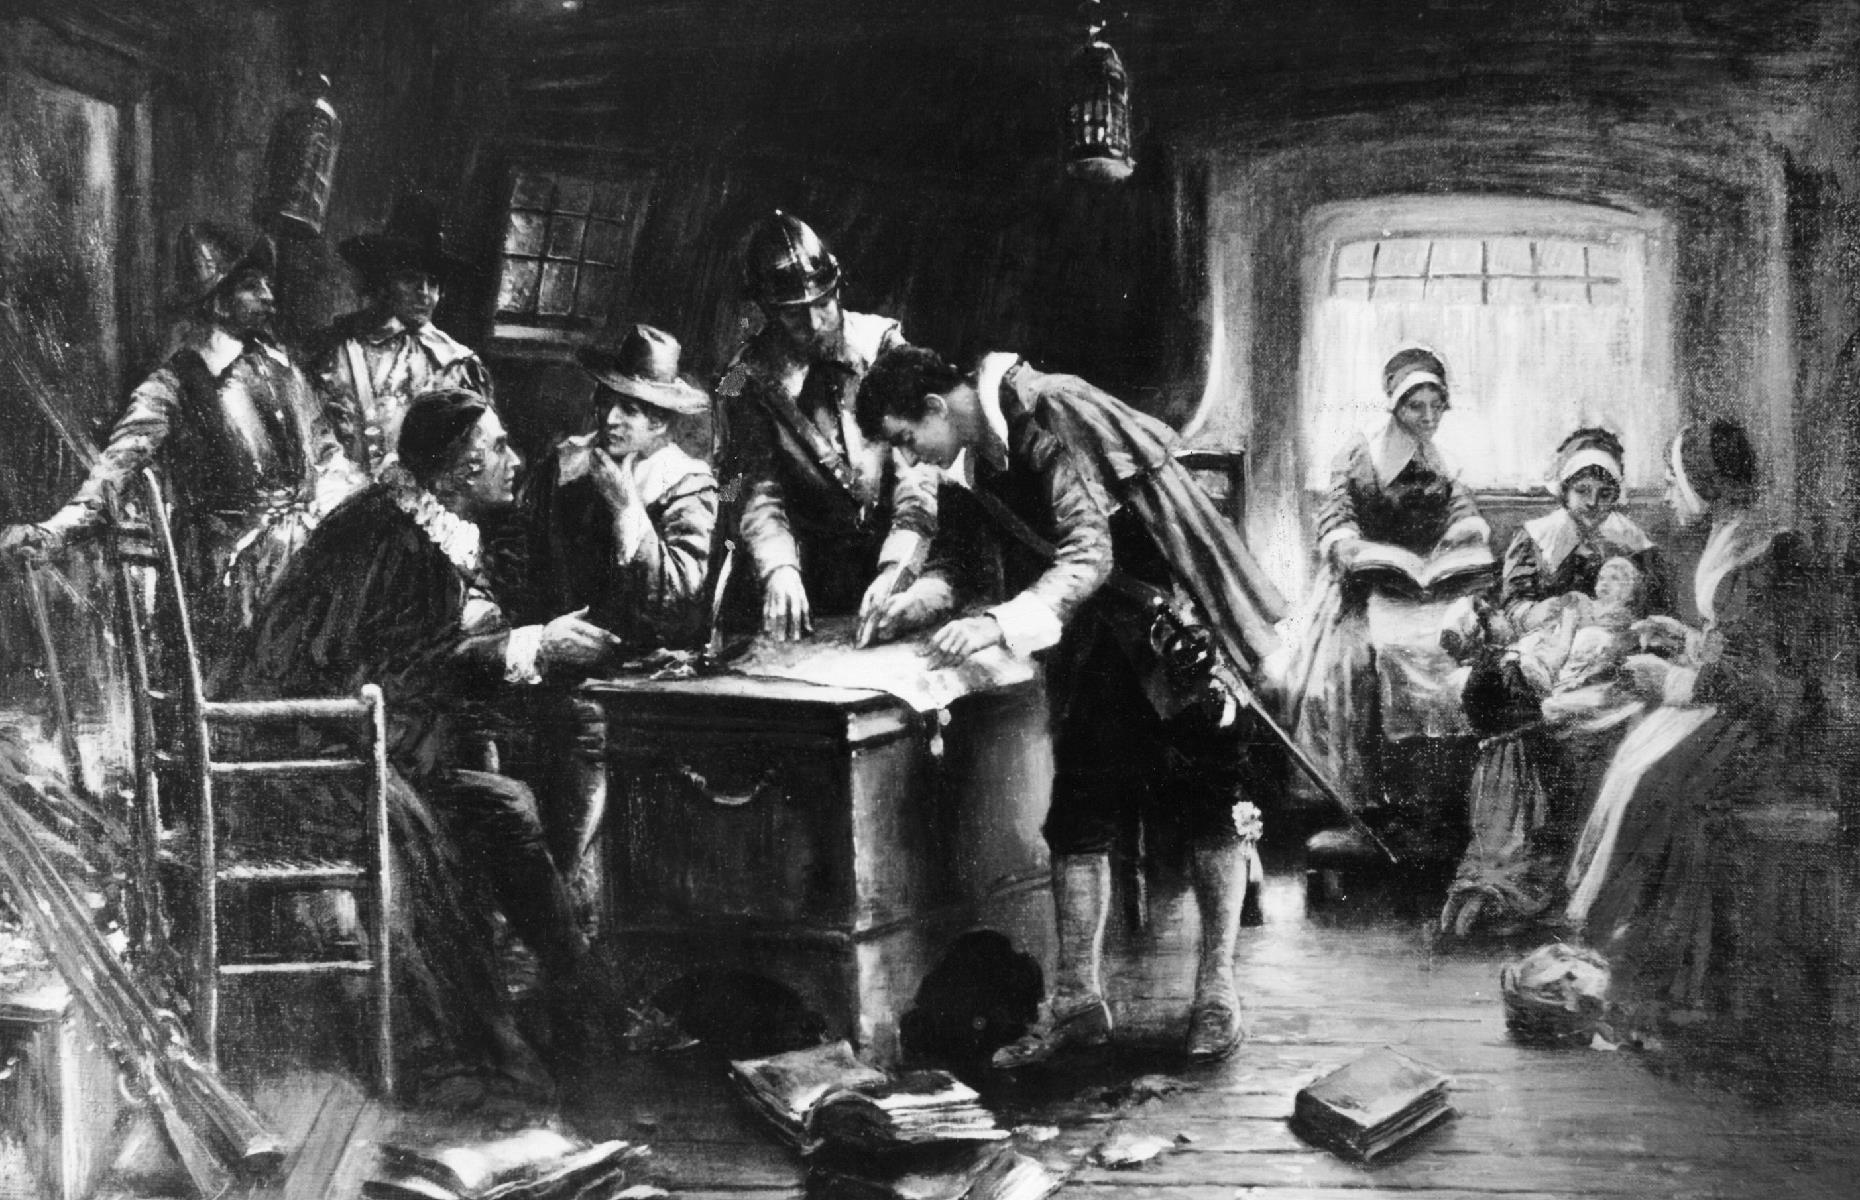 <p>The <a href="https://www.plimoth.org/sites/default/files/wysiwyg-images/Mayflower%20Compact%20in%20Bradford%27s%20Hand.pdf">Mayflower Compact</a> was signed by 41 men, as depicted here, who stated their intentions "to plant the first colony in the Northerne parts of Virginia" for "the glory of God, and advancement of the Christian faith". The Pilgrims also promised to act under "civill body politick, for our better ordering and preservation". Once the document was signed, the colonists began to explore the land they'd arrived upon. </p>